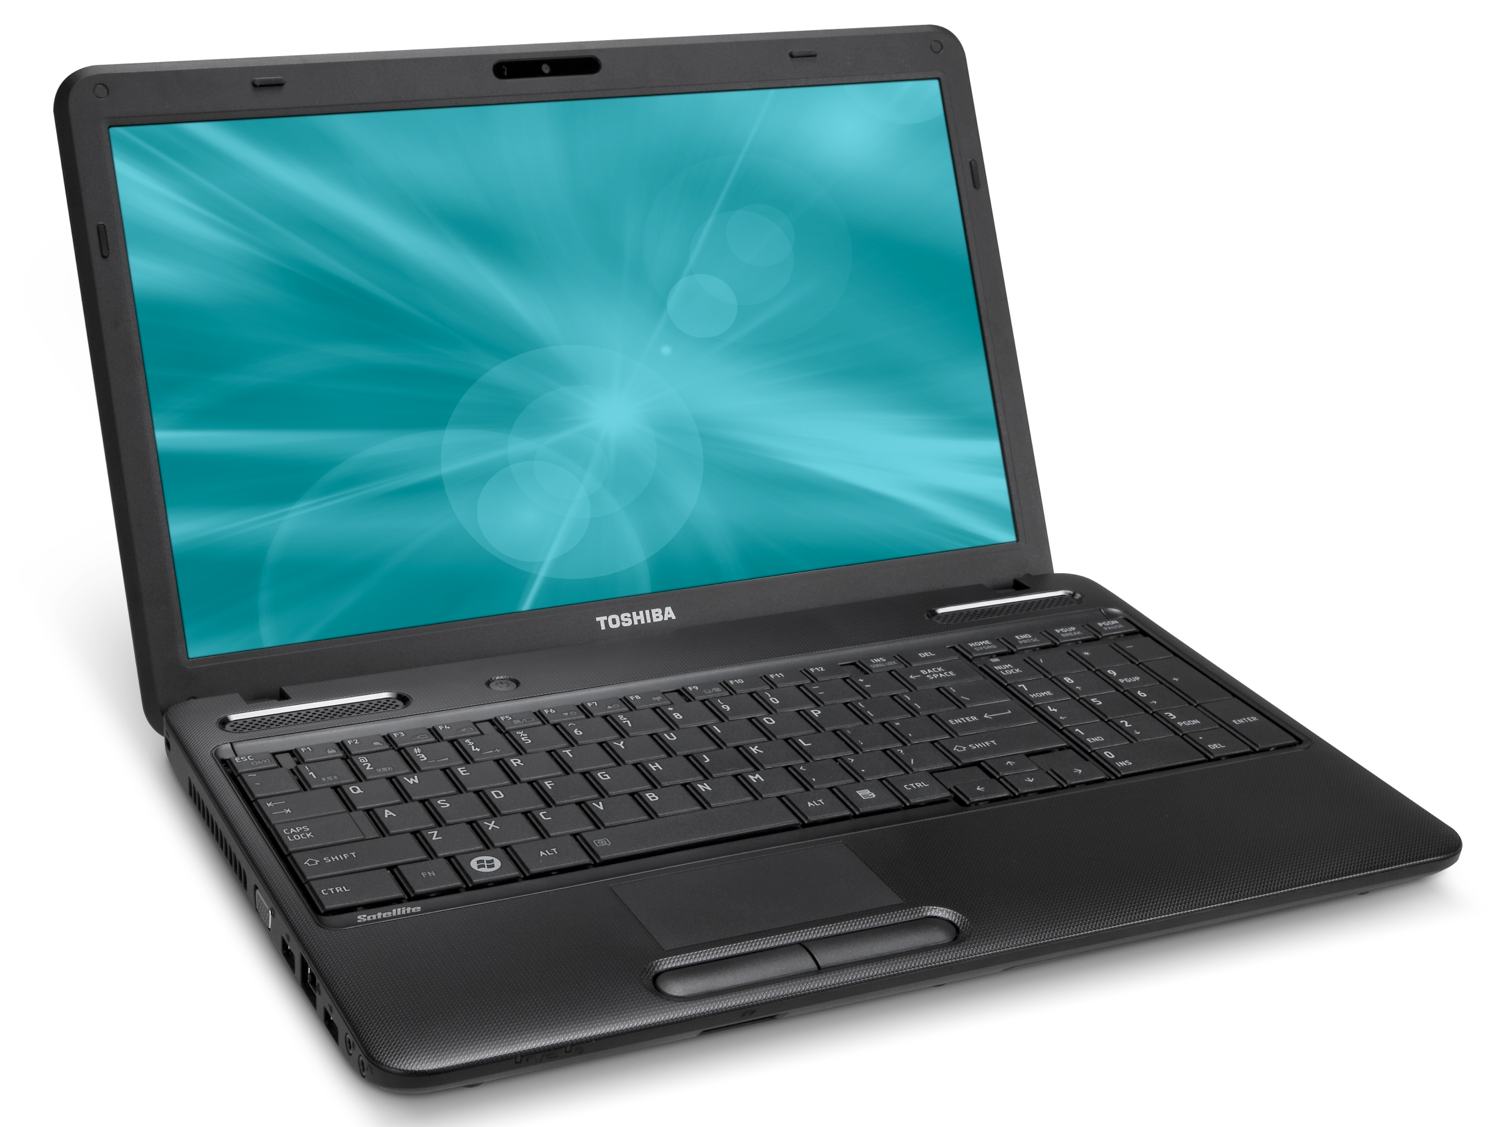 http://thetechjournal.com/wp-content/uploads/images/1110/1319098195-toshiba-satellite-c655ds5336-156inch-laptop-1.jpg